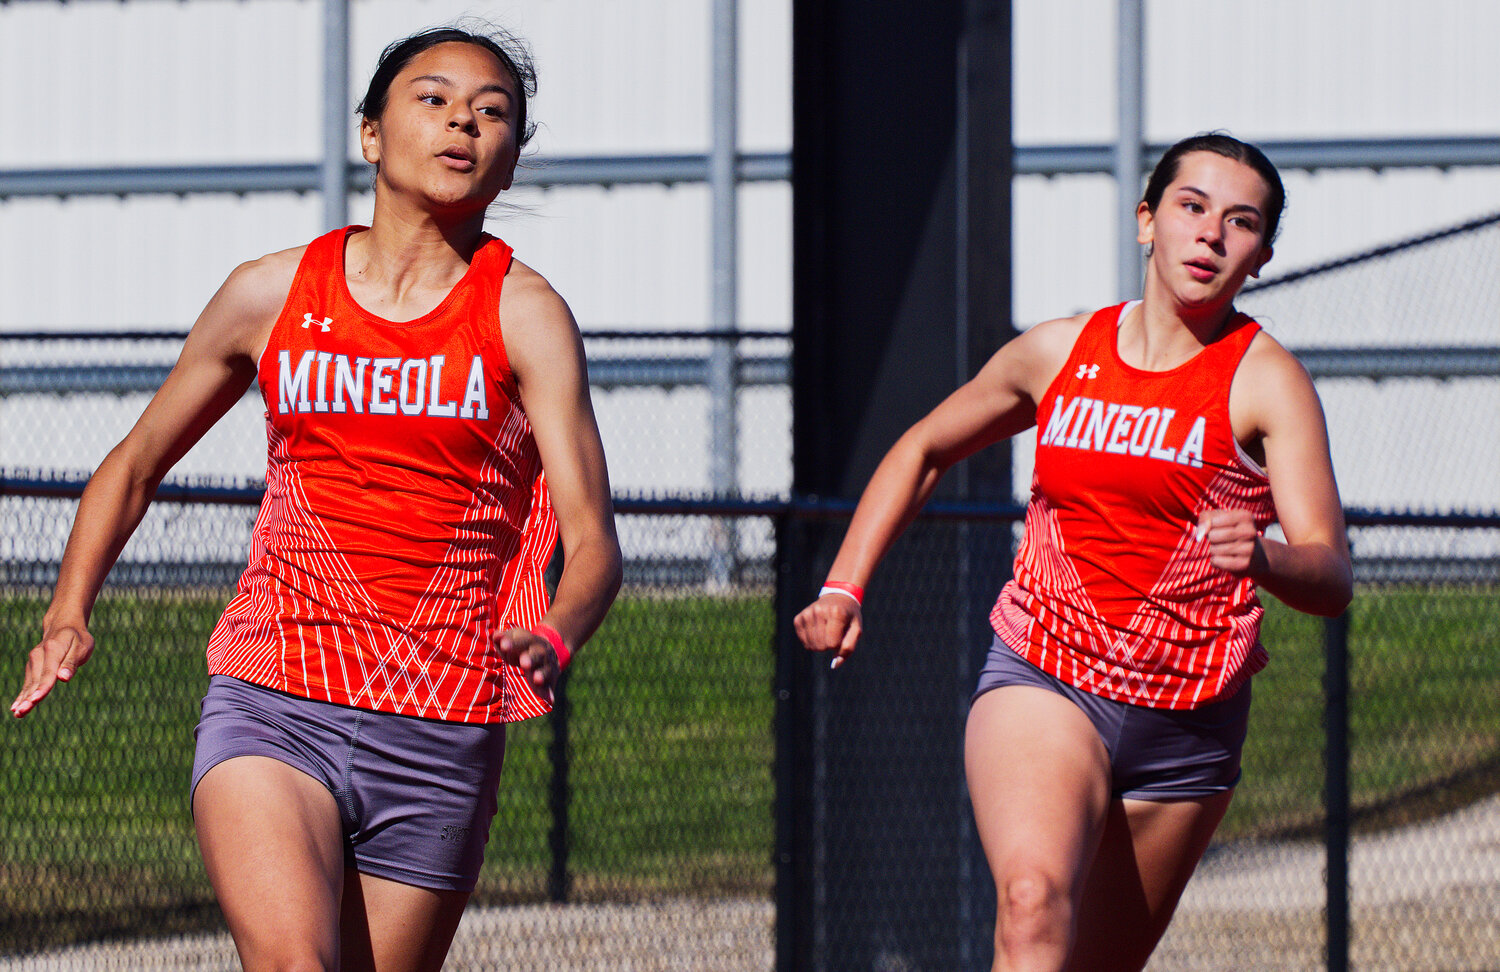 Mineola sprinters Stephanie Rojas and Carmen Carrasco round the bend in the 200m dash. [see more speed and strength on display]